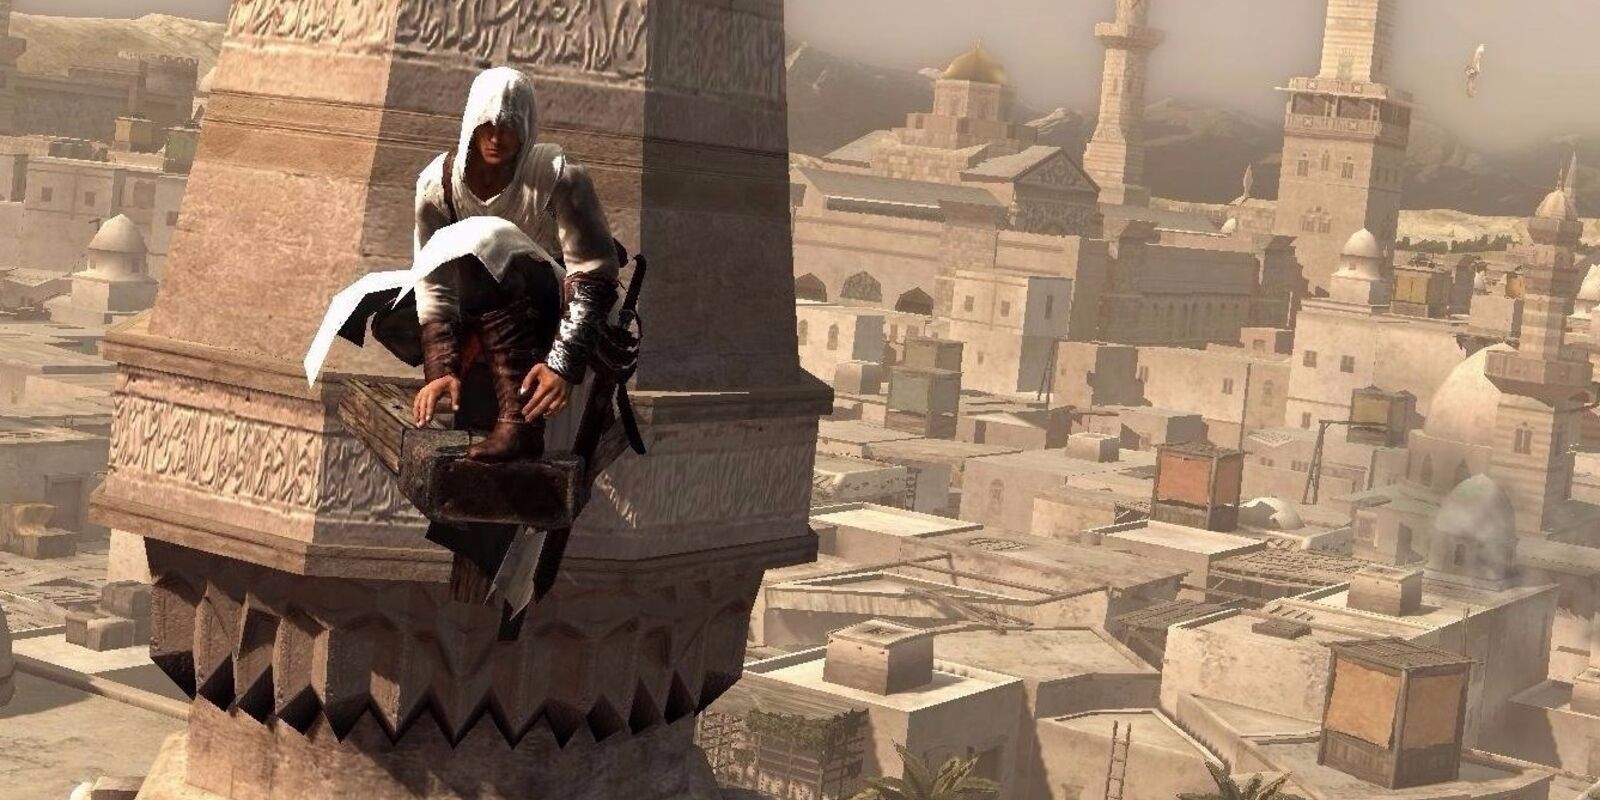 The original Assassin's Creed was groundbreaking at the time, and deserves a remake.